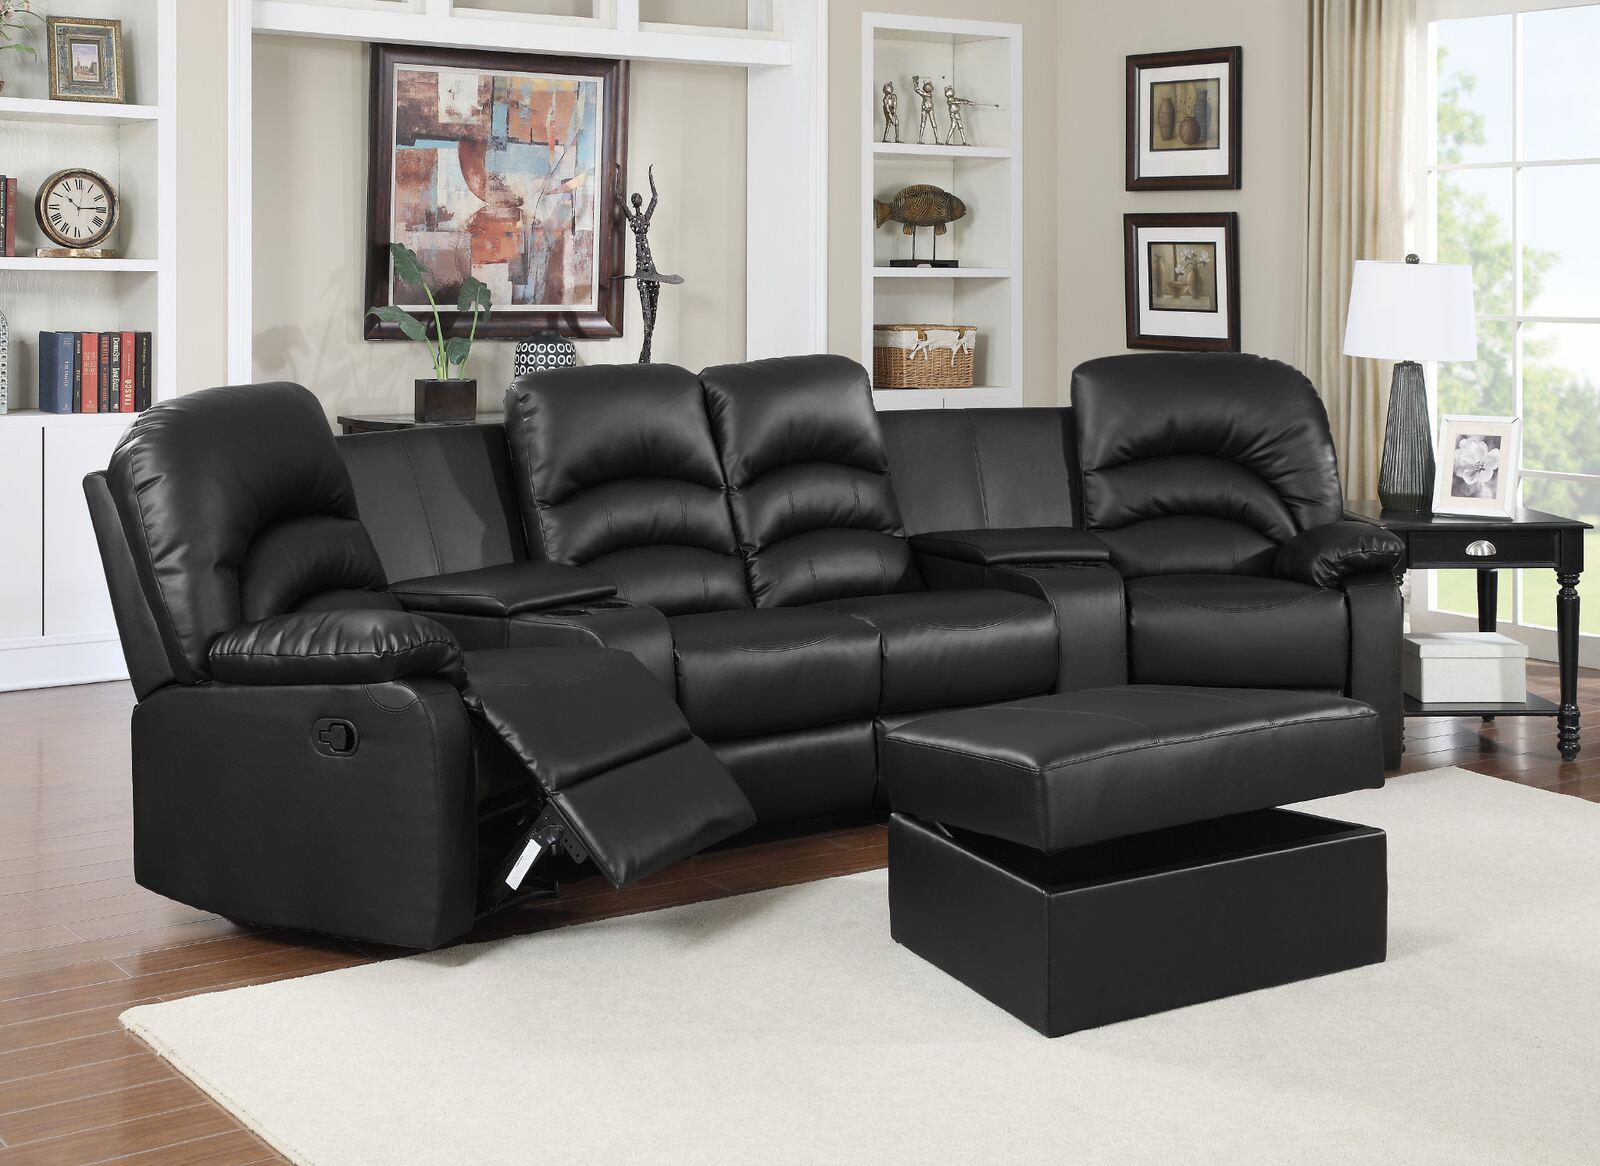 

    
Ventura Reclining Black Leather Sectional w/Ottoman Home Theater Seats
